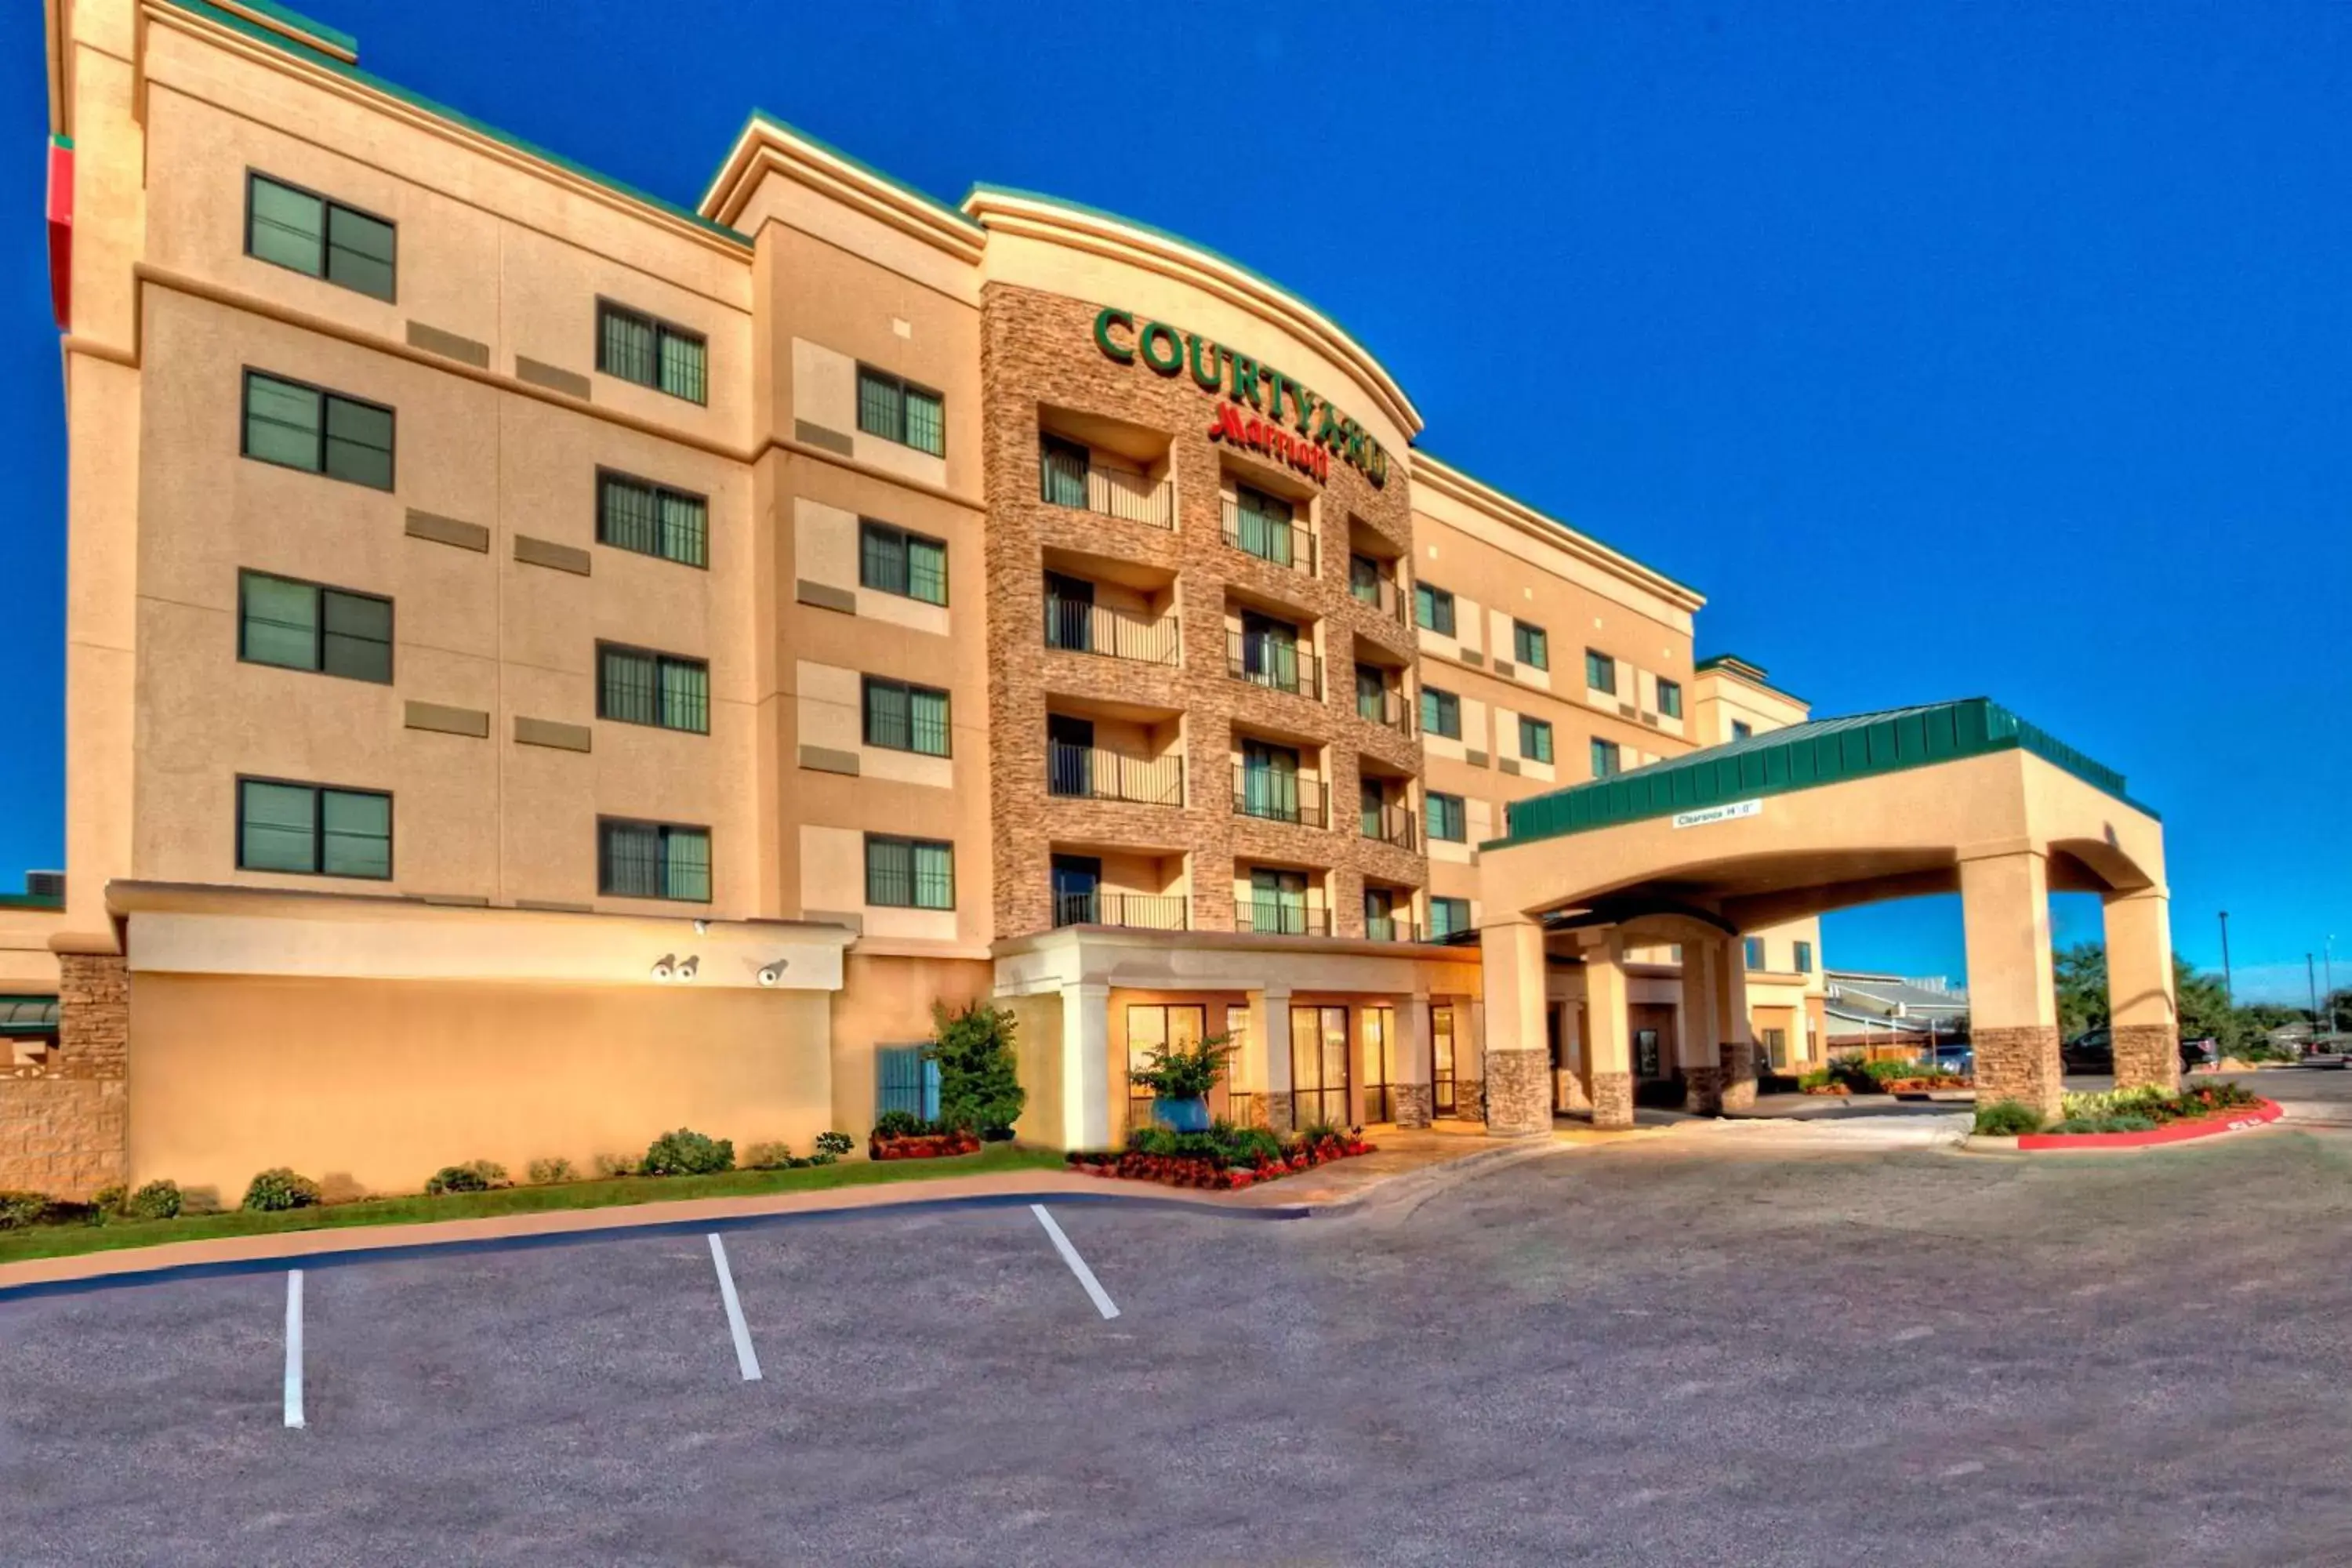 Property Building in Courtyard by Marriott Midland